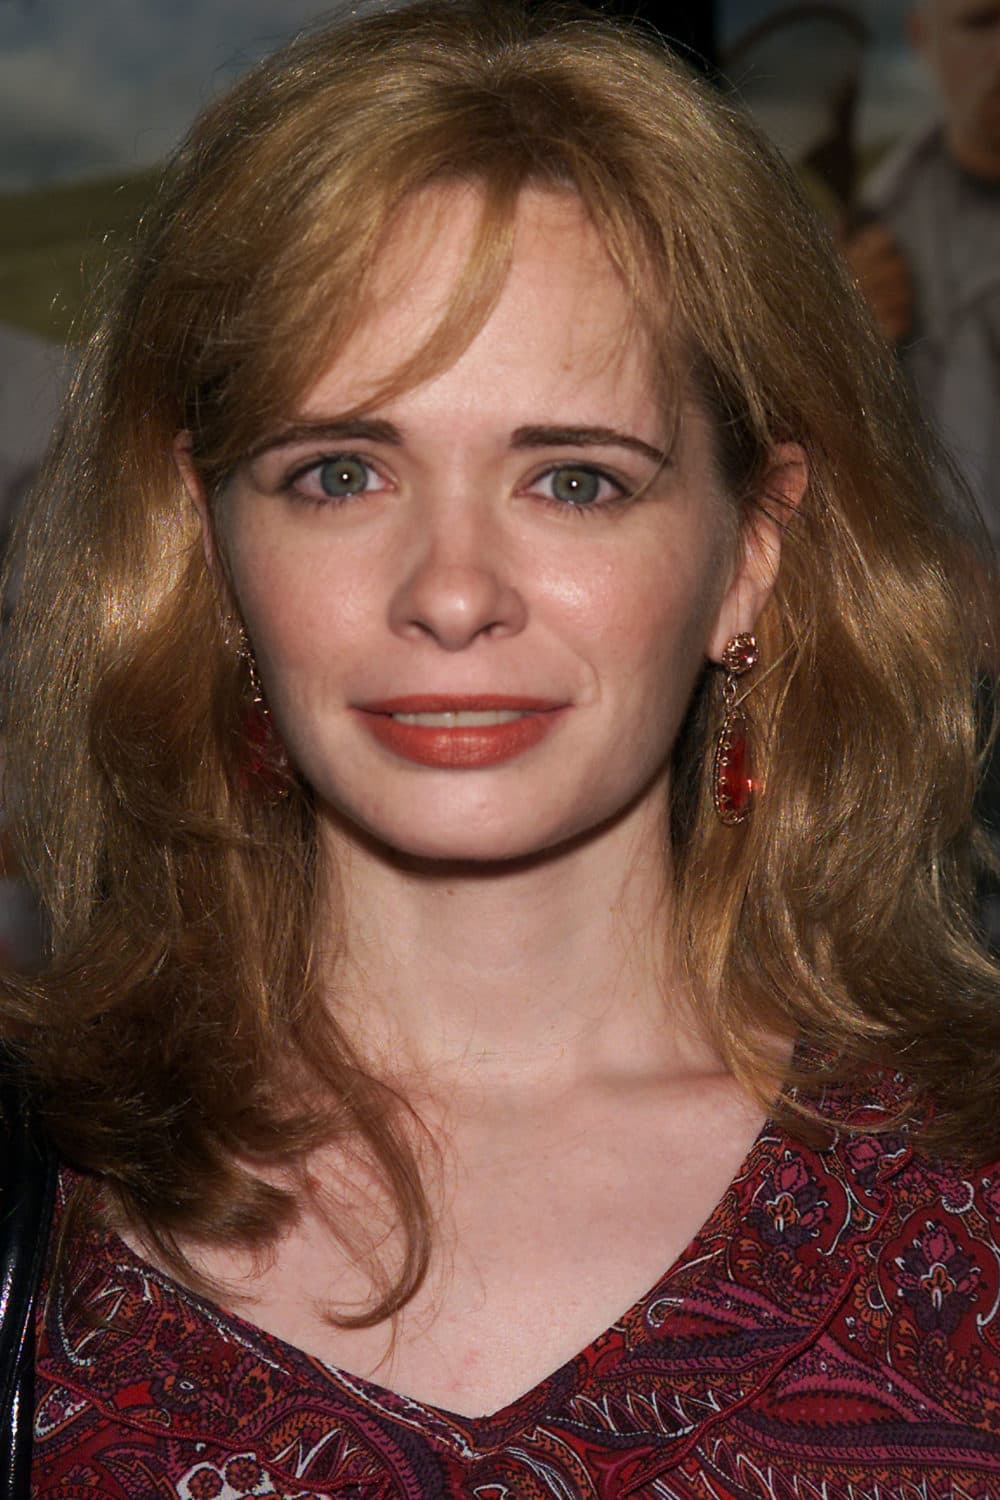 Adrienne Shelly pictured at the Sony Lincoln Square Theater in New York City, July 2001. (Evan Agostini/ Getty Images)